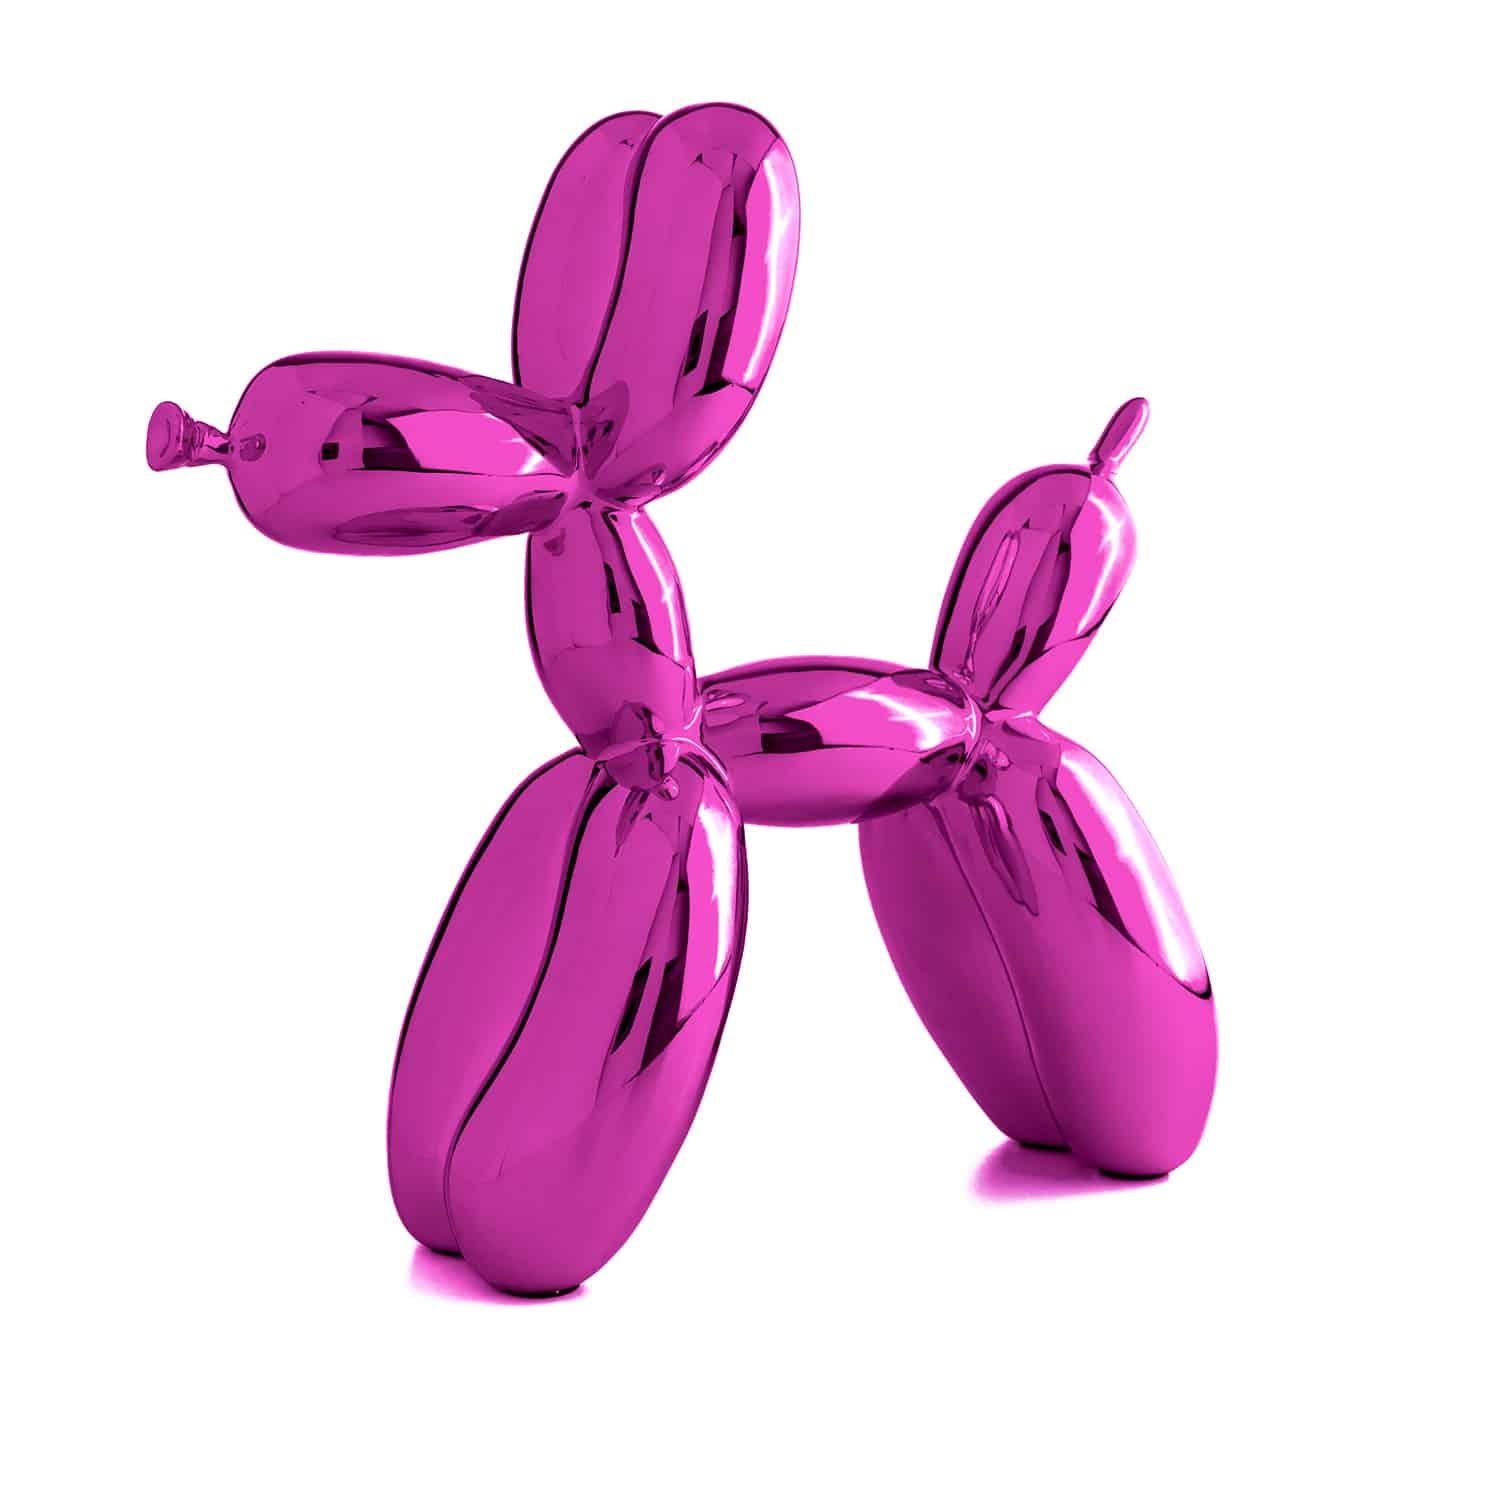 Balloon Dog (After) - Pink - Sculpture by After Jeff Koons